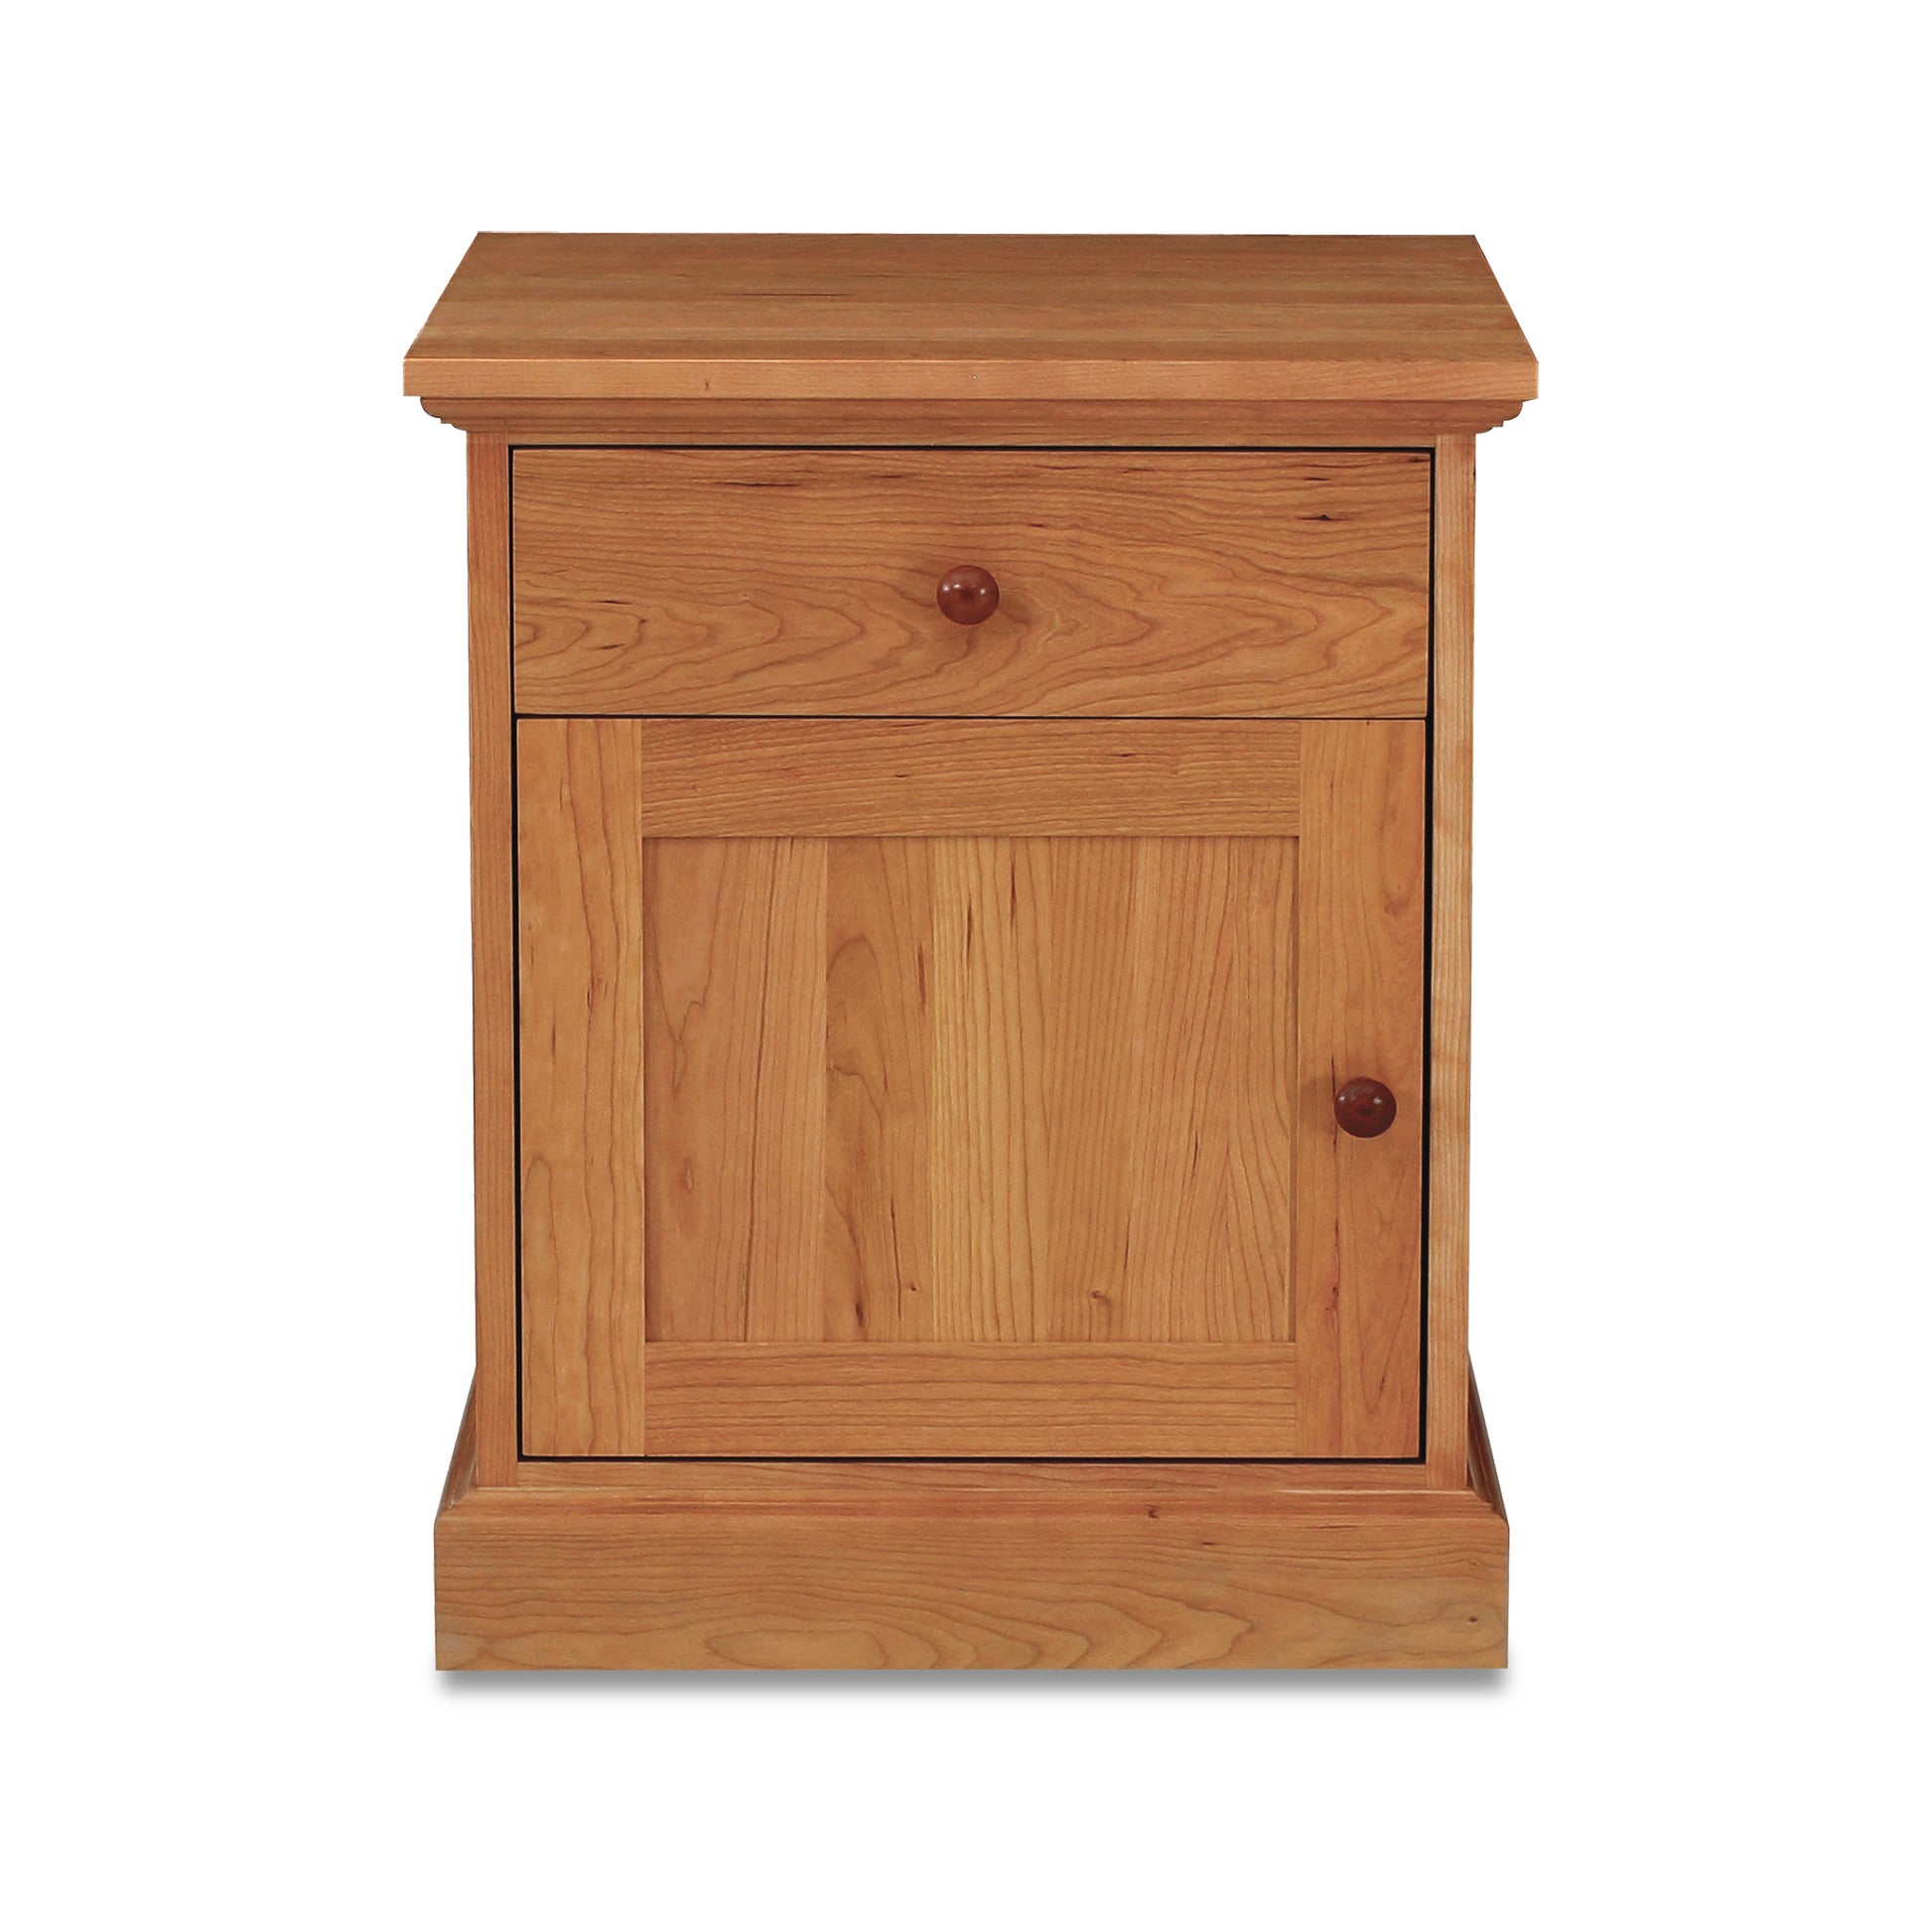 A small Lyndon Furniture New England Shaker 1-Drawer Nightstand with Door made of cherry hardwood, placed on a white background.